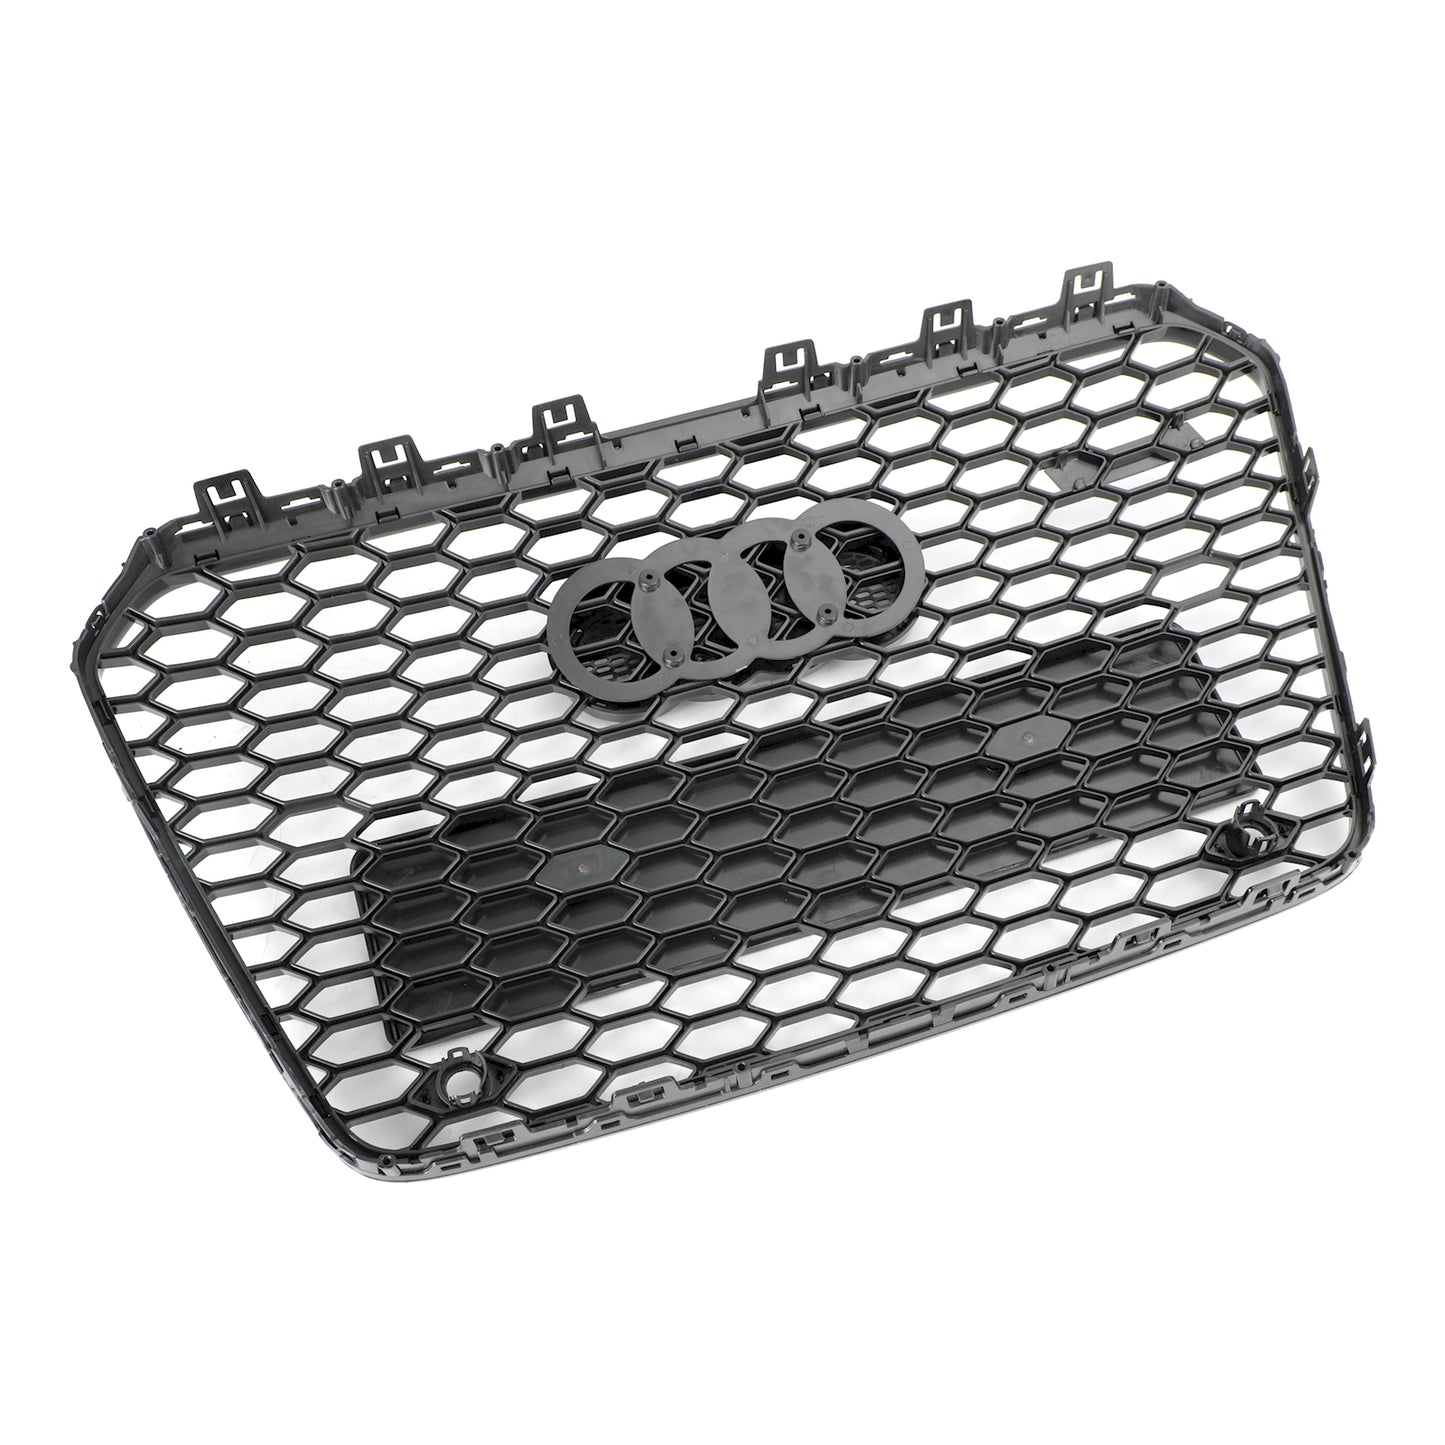 2013-2016 Audi A5 S5 B8.5 Honeycomb Hex Mesh Front Bumper Car Grille RS5 Style